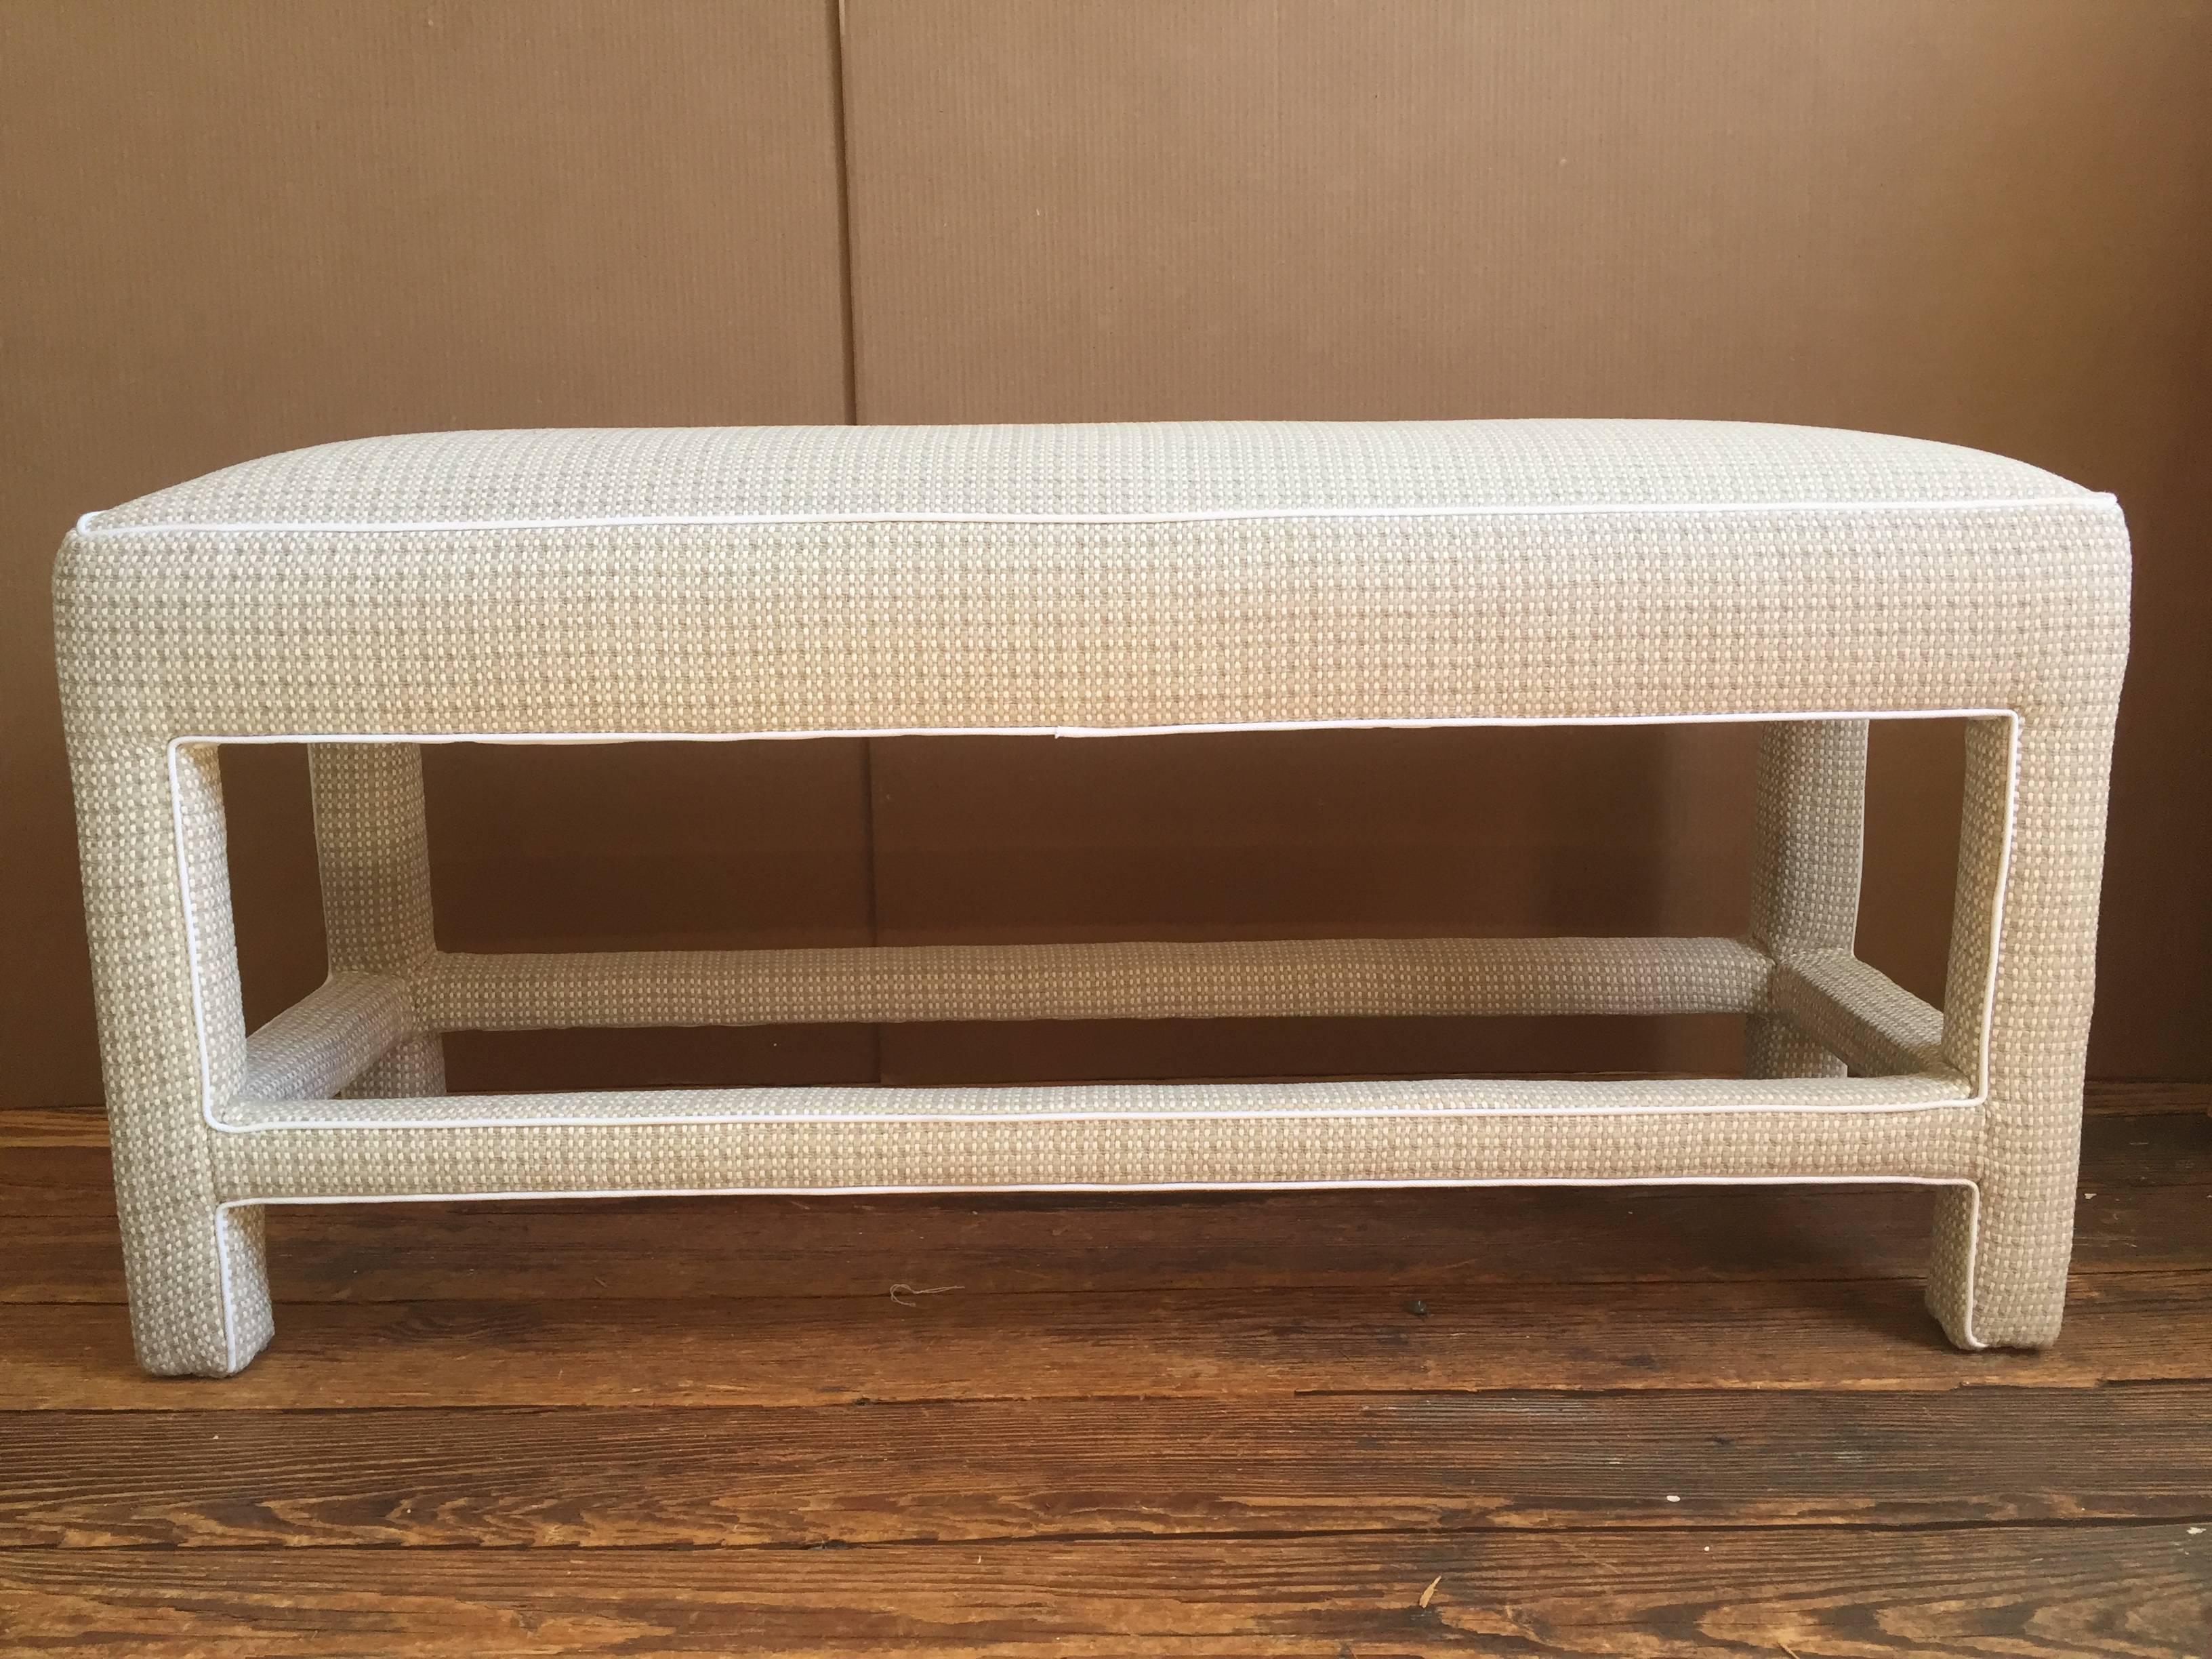 American Classic Mid-Century Modern Upholstered Bench